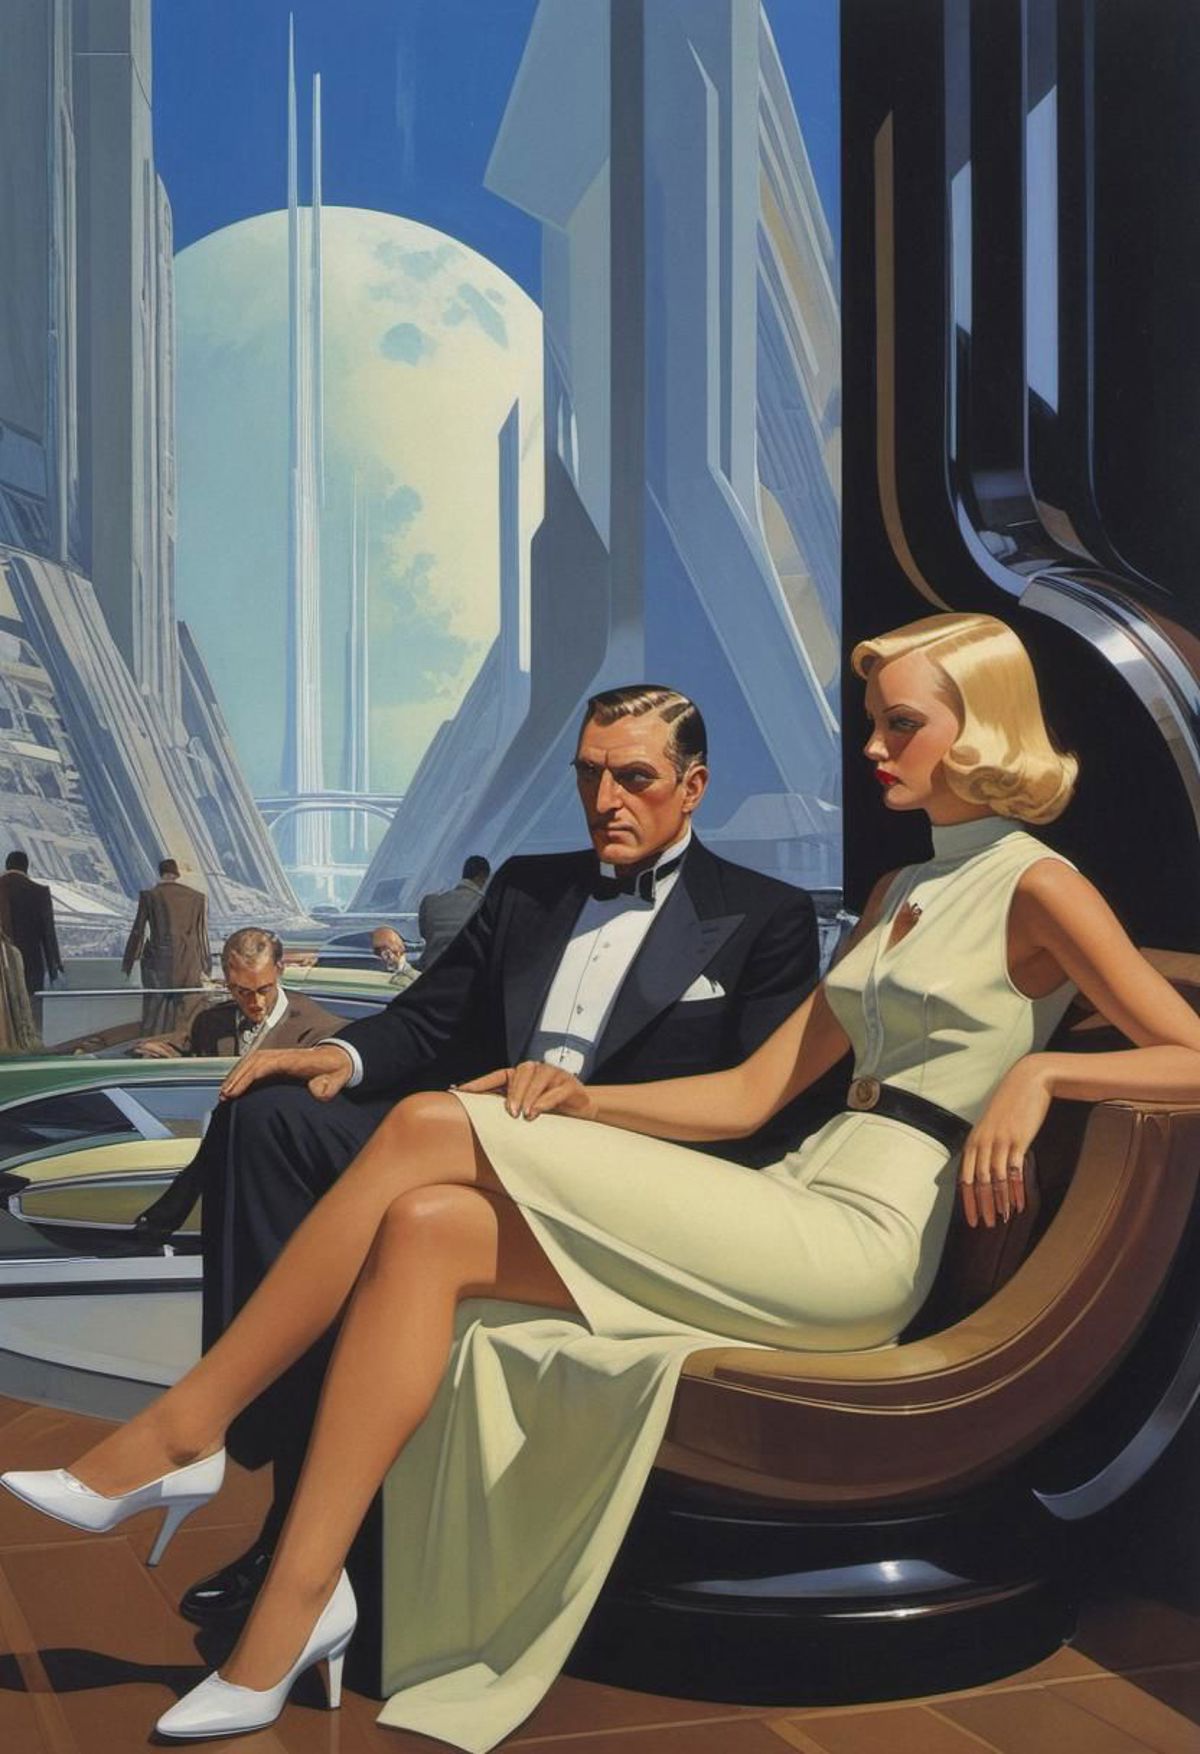 A Painting of a Man and Woman Sitting on a Couch in a Futuristic Cityscape